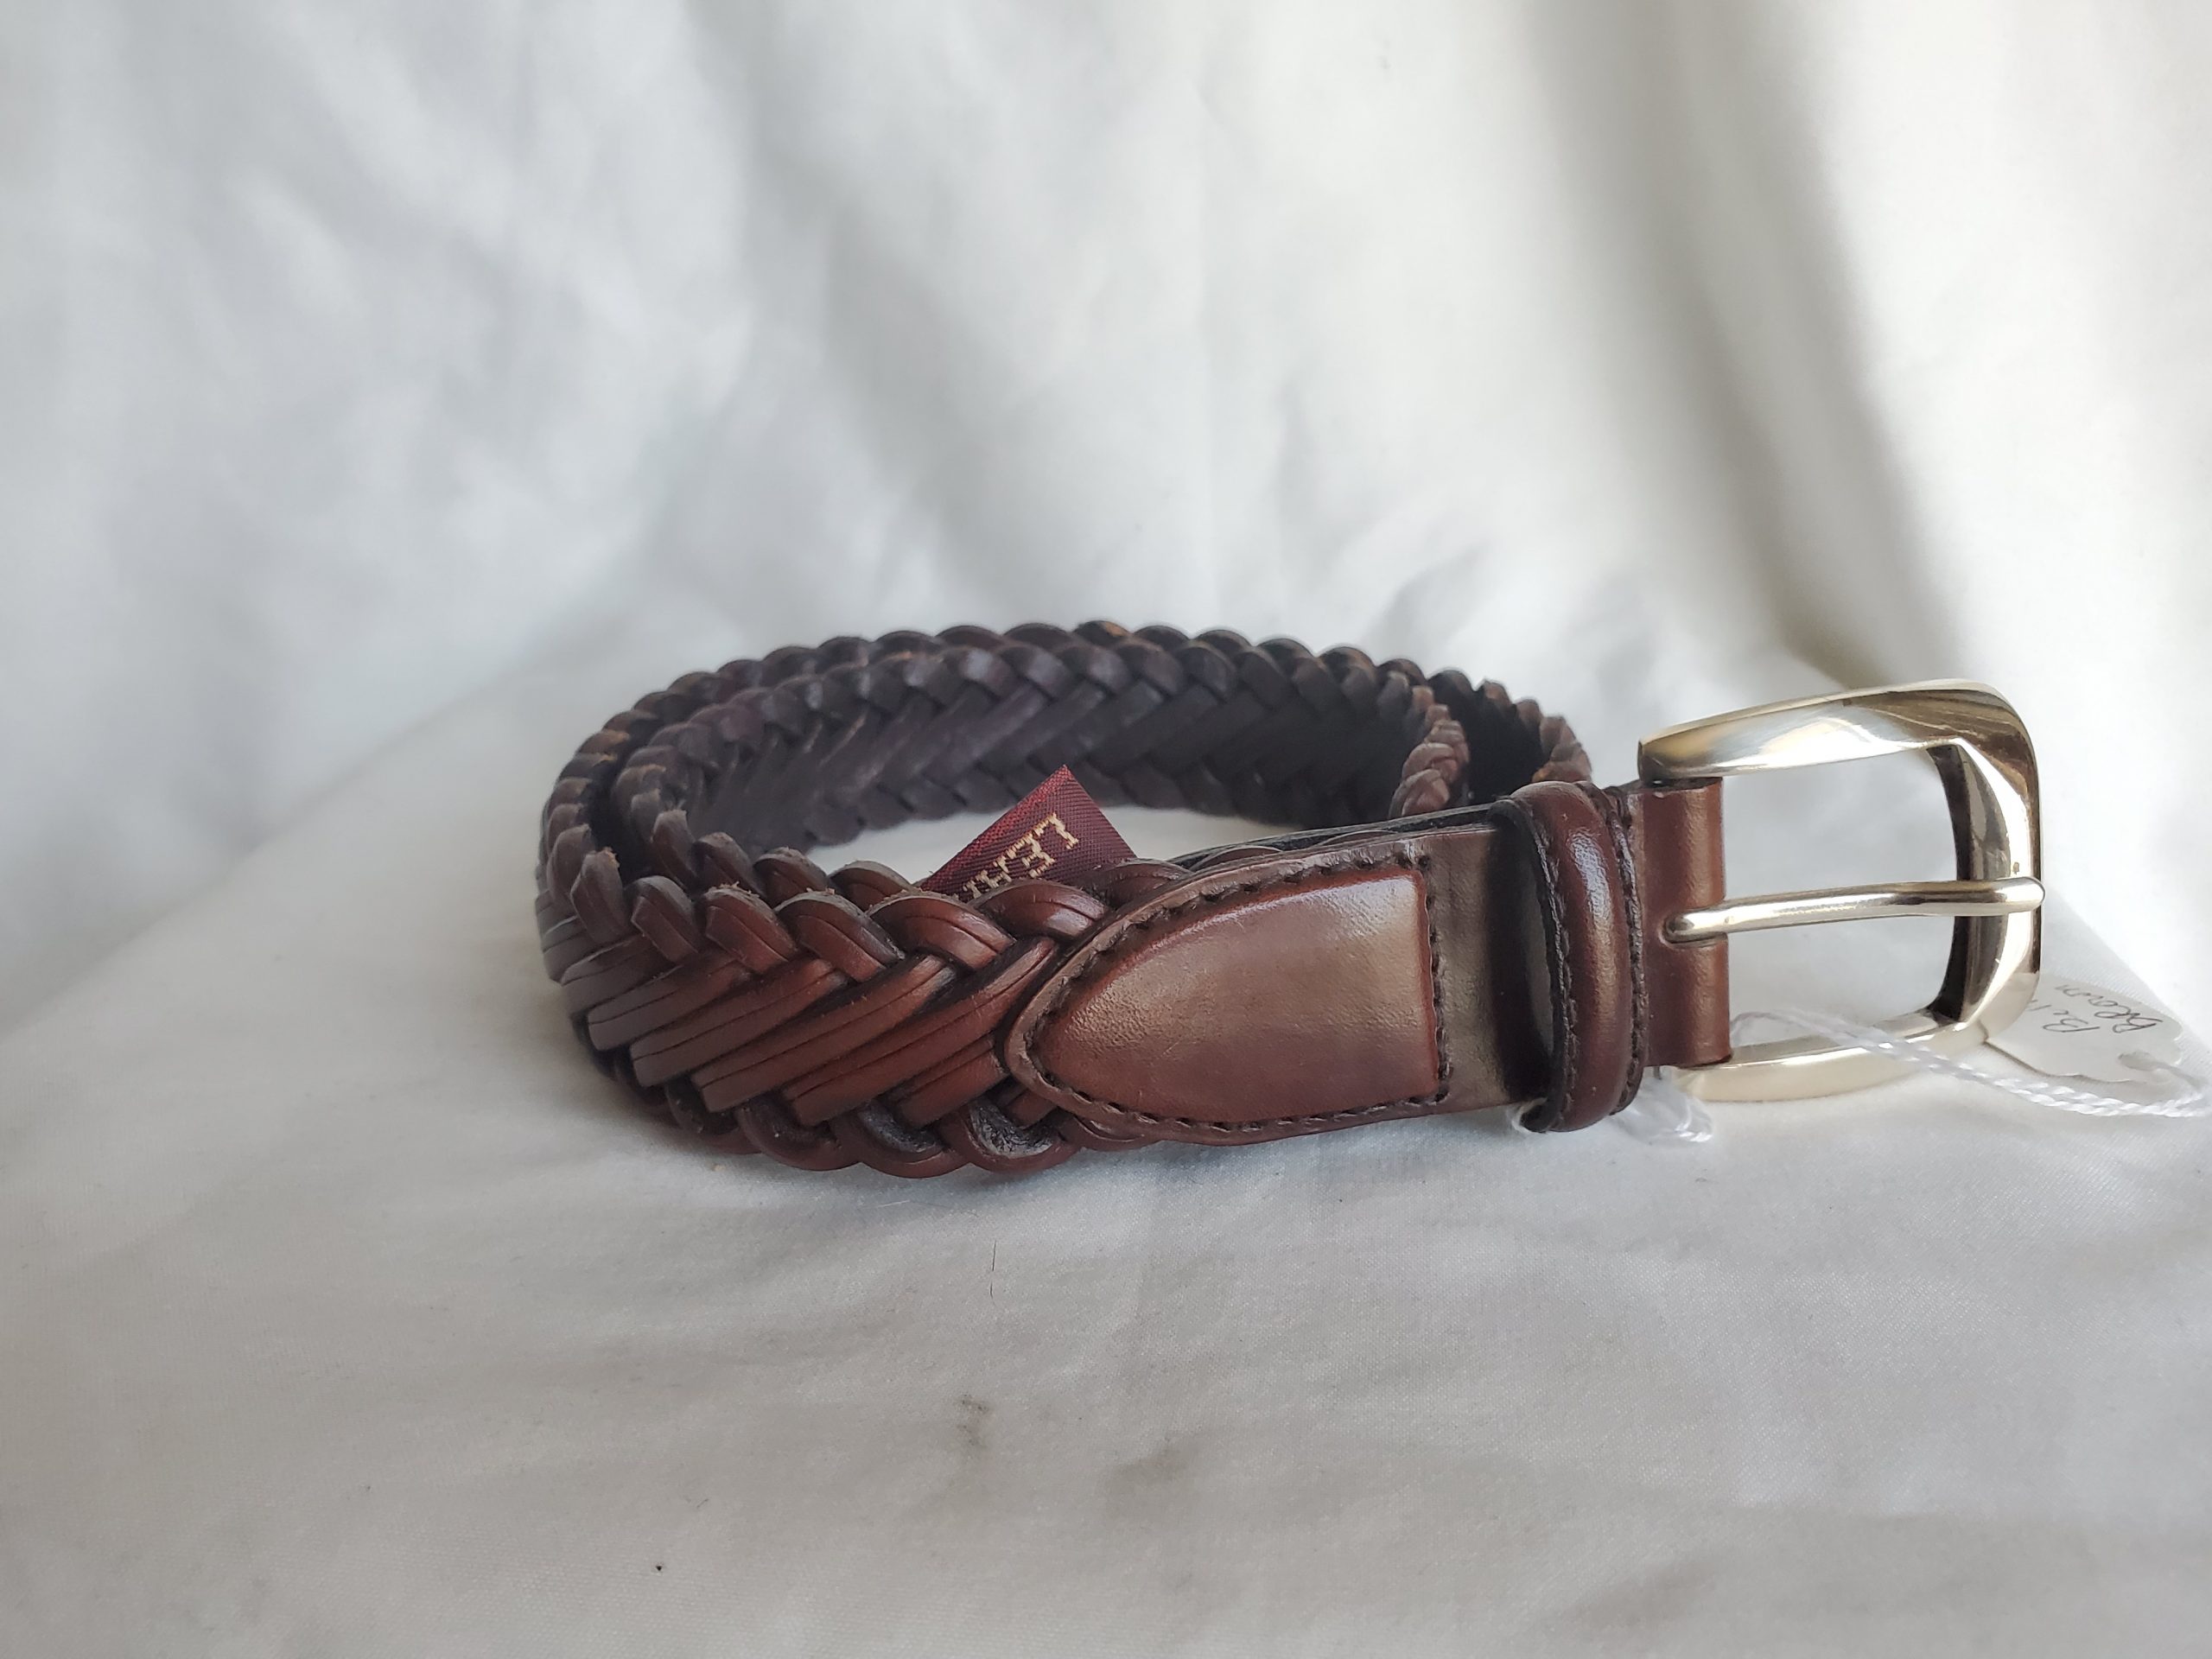 Arden Braided Belt (Small) - $20 | Foundation for Diabetes Research